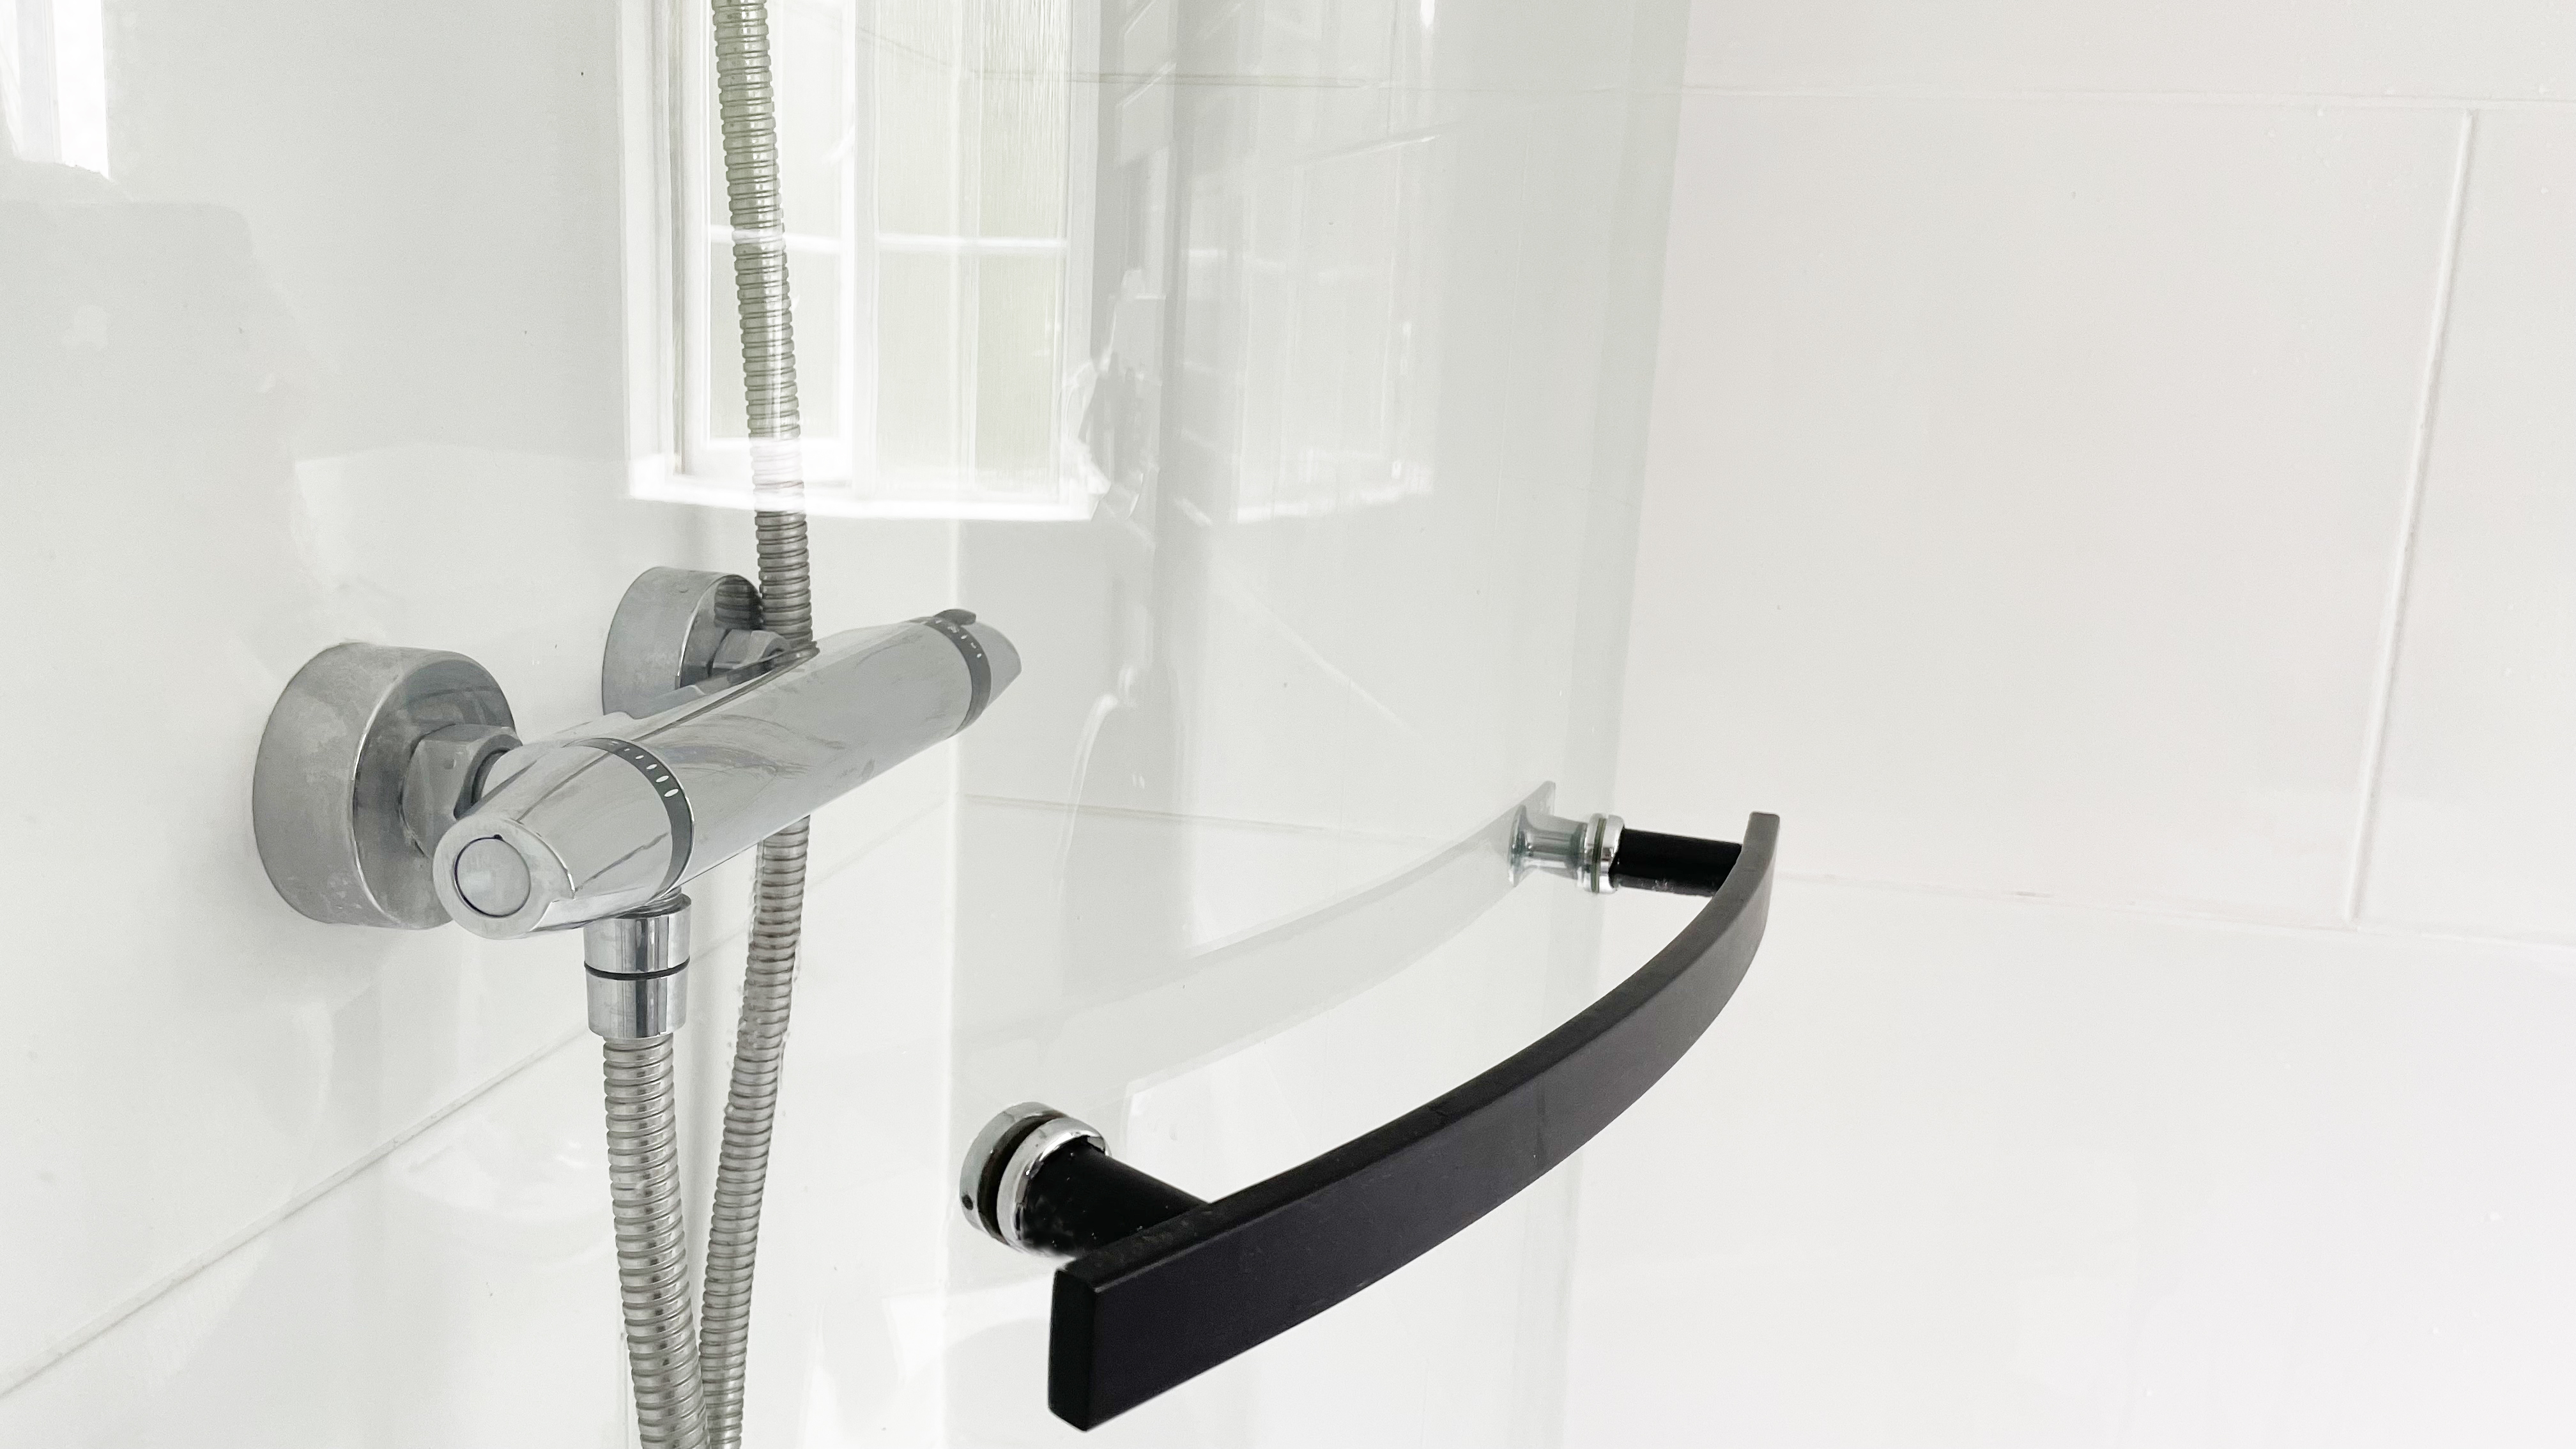 How To Clean Shower Doors in 4 Easy Steps